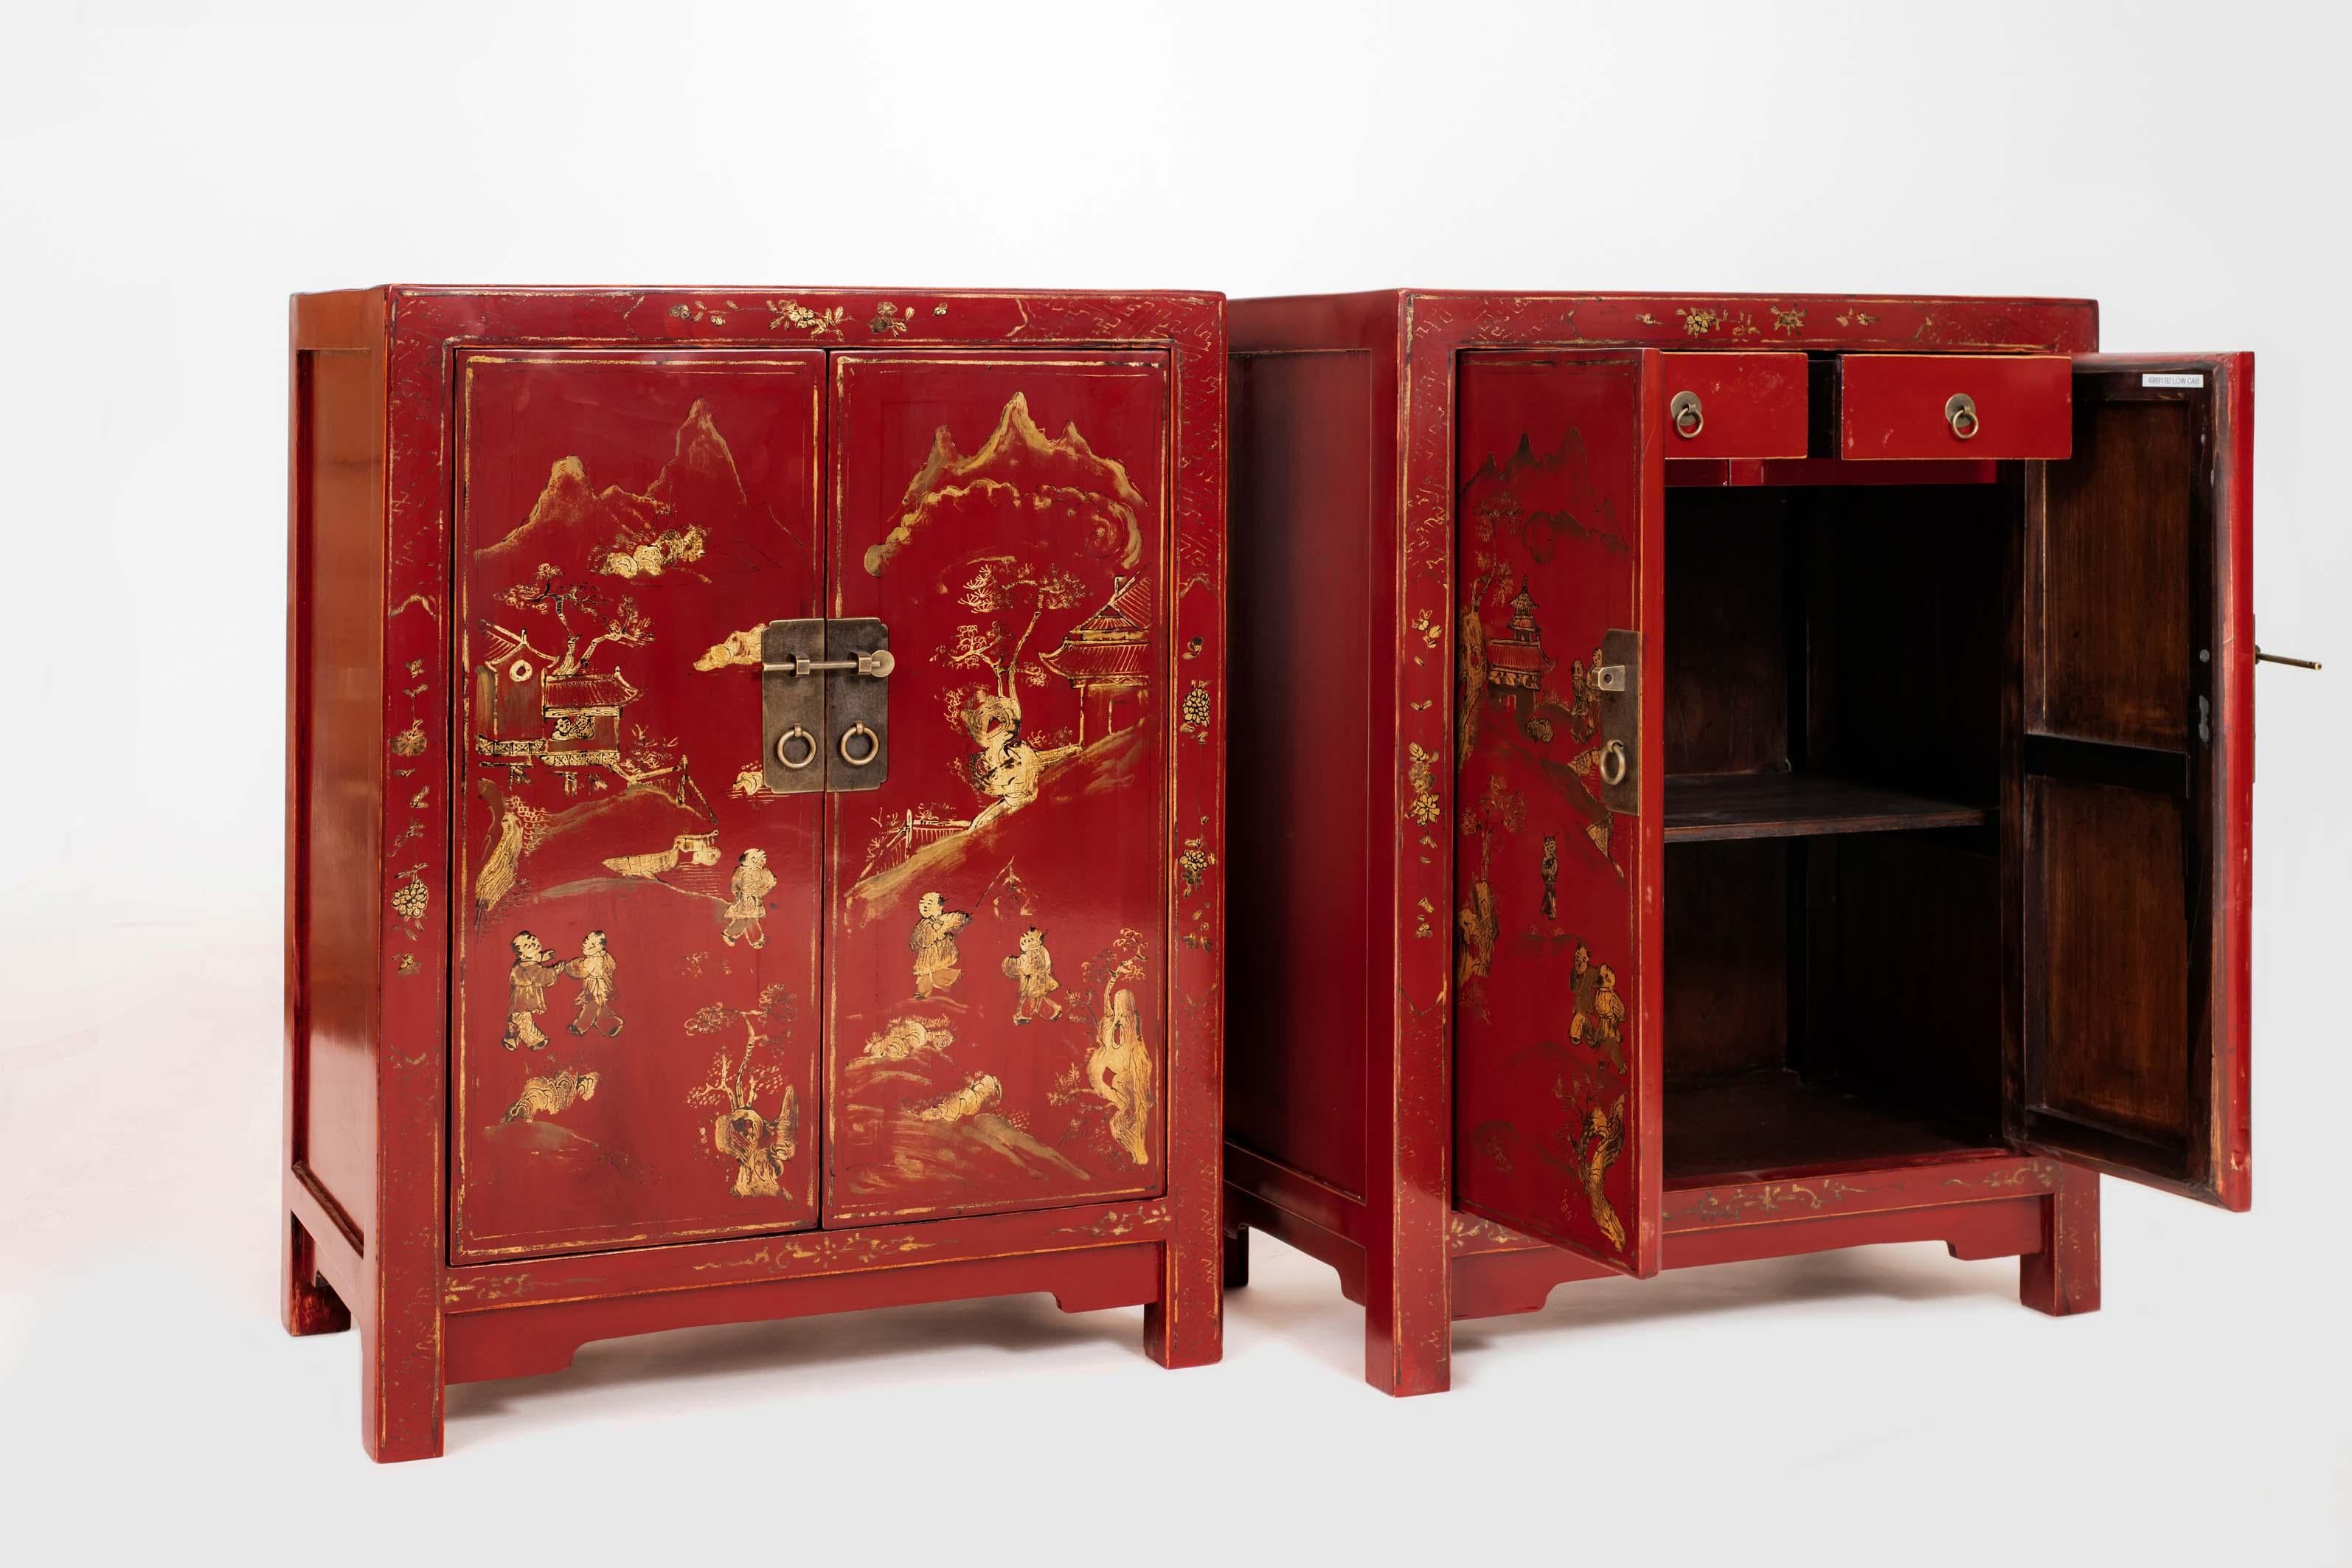 Hand-Crafted Pair of Small Red Lacquer Cabinets Handpainted with Gilt Children in Courtyard